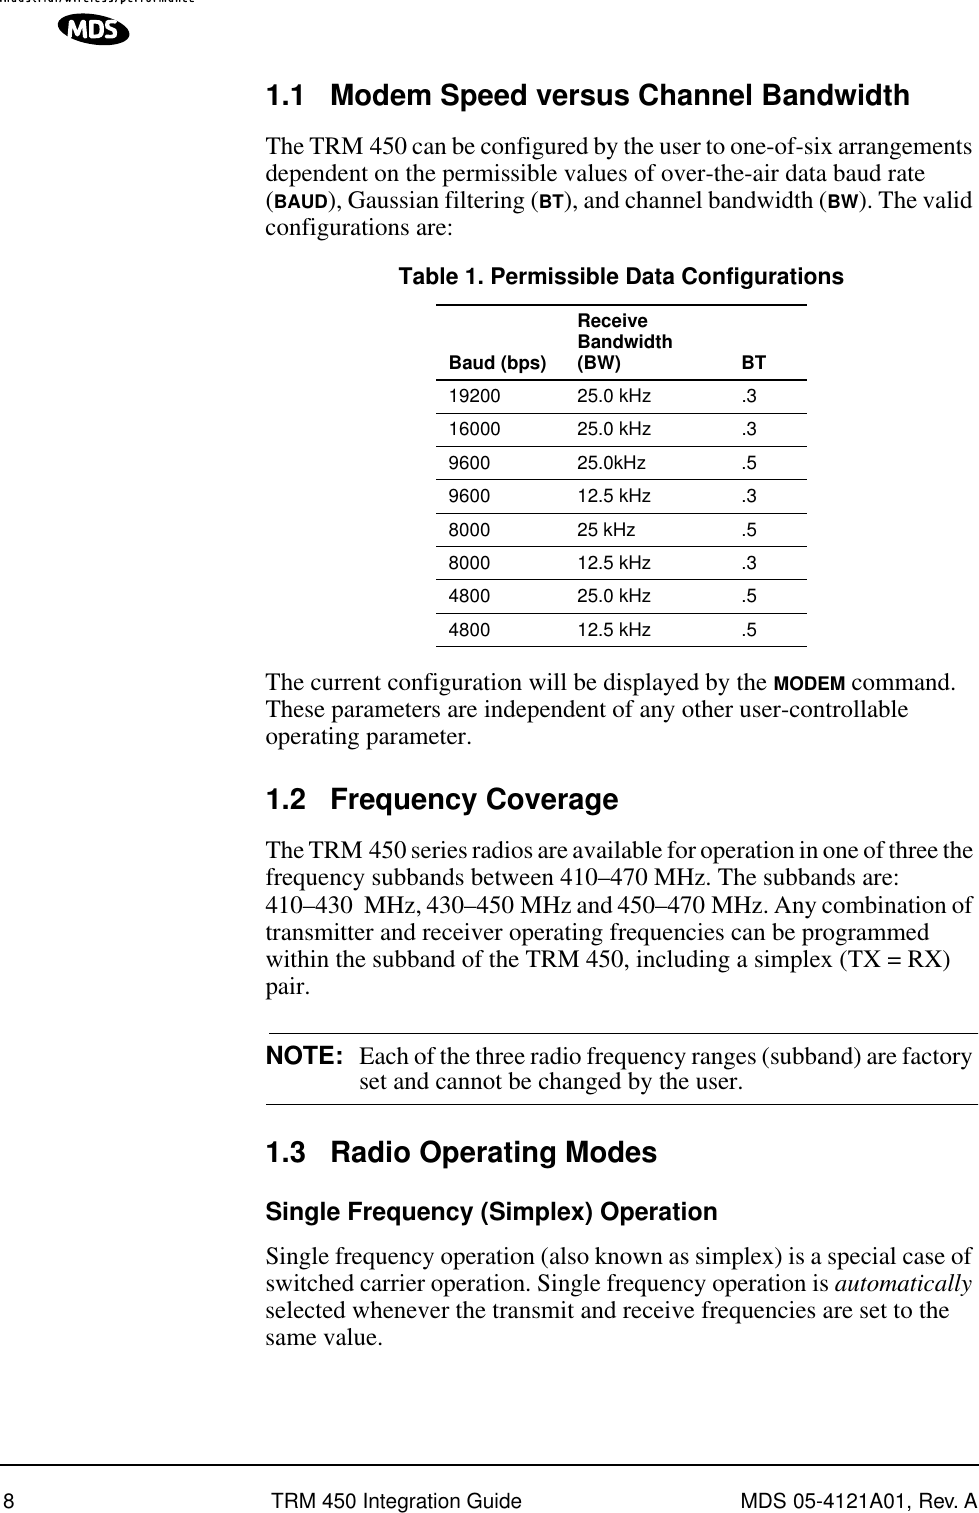  8 TRM 450 Integration Guide MDS 05-4121A01, Rev. A 1.1 Modem Speed versus Channel Bandwidth The TRM 450 can be configured by the user to one-of-six arrangements dependent on the permissible values of over-the-air data baud rate ( BAUD ), Gaussian filtering ( BT ), and channel bandwidth ( BW ). The valid configurations are:The current configuration will be displayed by the  MODEM  command. These parameters are independent of any other user-controllable operating parameter. 1.2 Frequency Coverage The TRM 450 series radios are available for operation in one of three the frequency subbands between 410–470 MHz. The subbands are: 410–430  MHz, 430–450 MHz and 450–470 MHz. Any combination of transmitter and receiver operating frequencies can be programmed within the subband of the TRM 450, including a simplex (TX = RX) pair. NOTE: Each of the three radio frequency ranges (subband) are factory  set and cannot be changed by the user. 1.3 Radio Operating Modes Single Frequency (Simplex) Operation Single frequency operation (also known as simplex) is a special case of switched carrier operation. Single frequency operation is  automatically  selected whenever the transmit and receive frequencies are set to the same value. Table 1. Permissible Data Configurations Baud (bps)Receive Bandwidth (BW) BT 19200 25.0 kHz .316000 25.0 kHz .39600 25.0kHz .59600 12.5 kHz .38000 25 kHz .58000 12.5 kHz .34800 25.0 kHz .54800 12.5 kHz .5